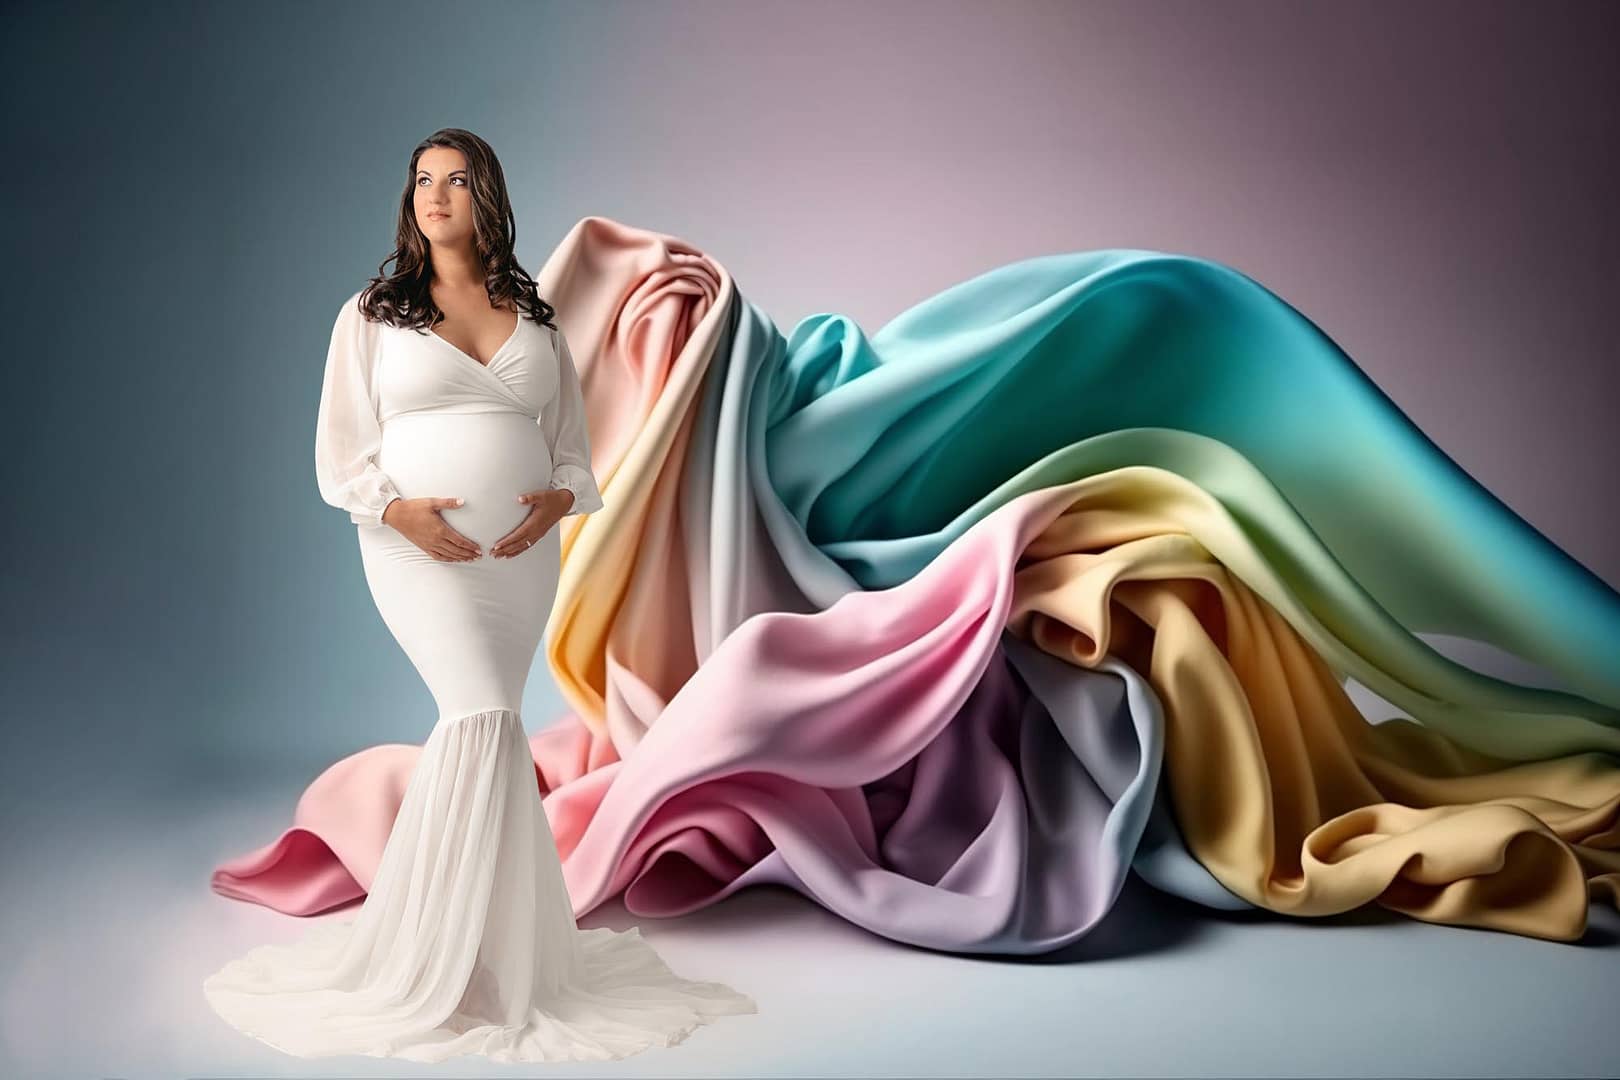 San Diego Pregnancy Photographer capturing mom to be in white maternity dress with a rainbow colors fabric flying behind